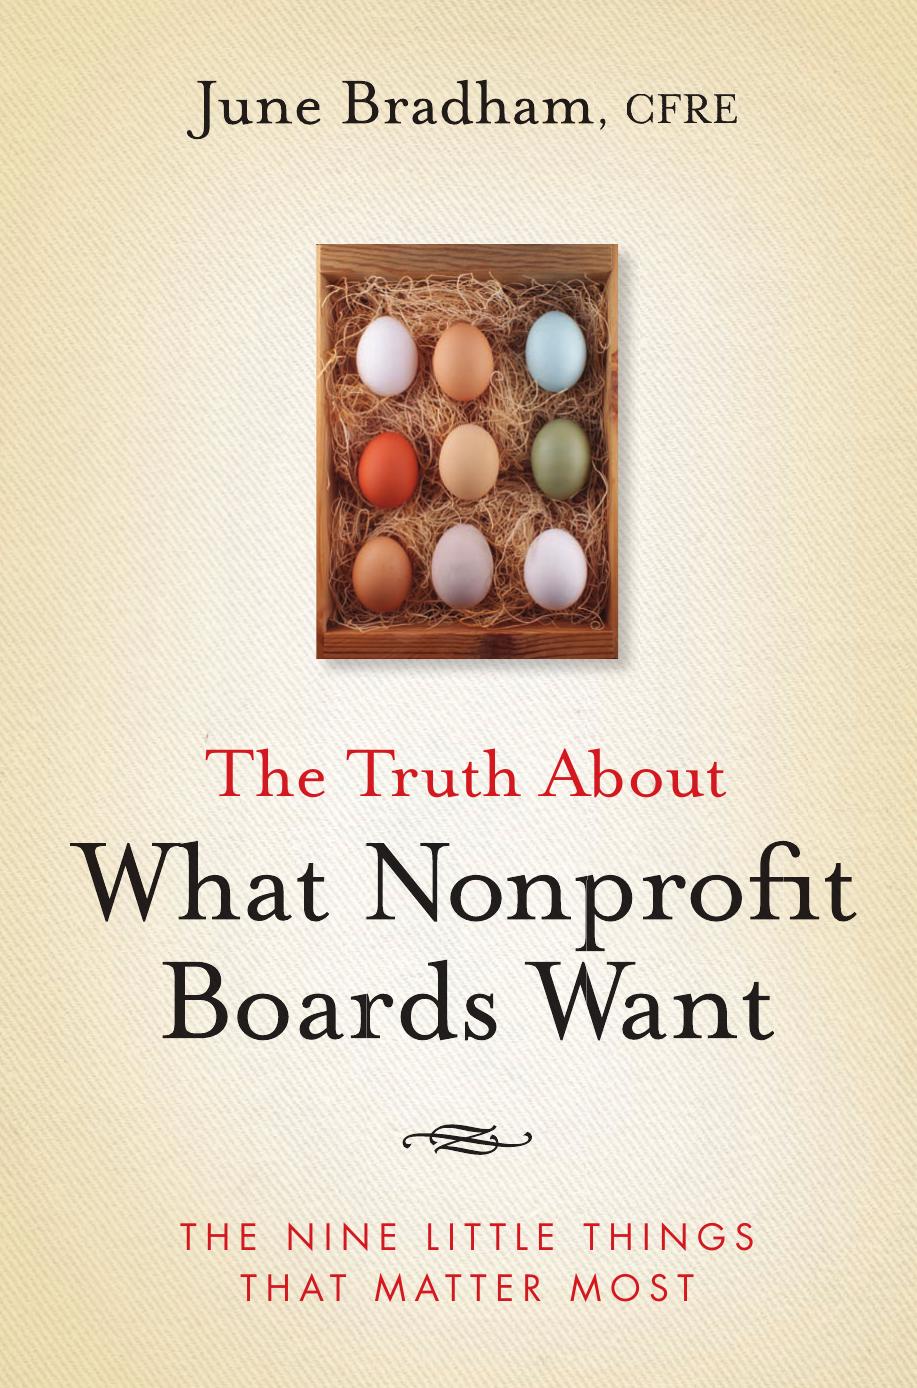 The Truth About What Nonprofit Boards Want: The Nine Little Things That Matter Most